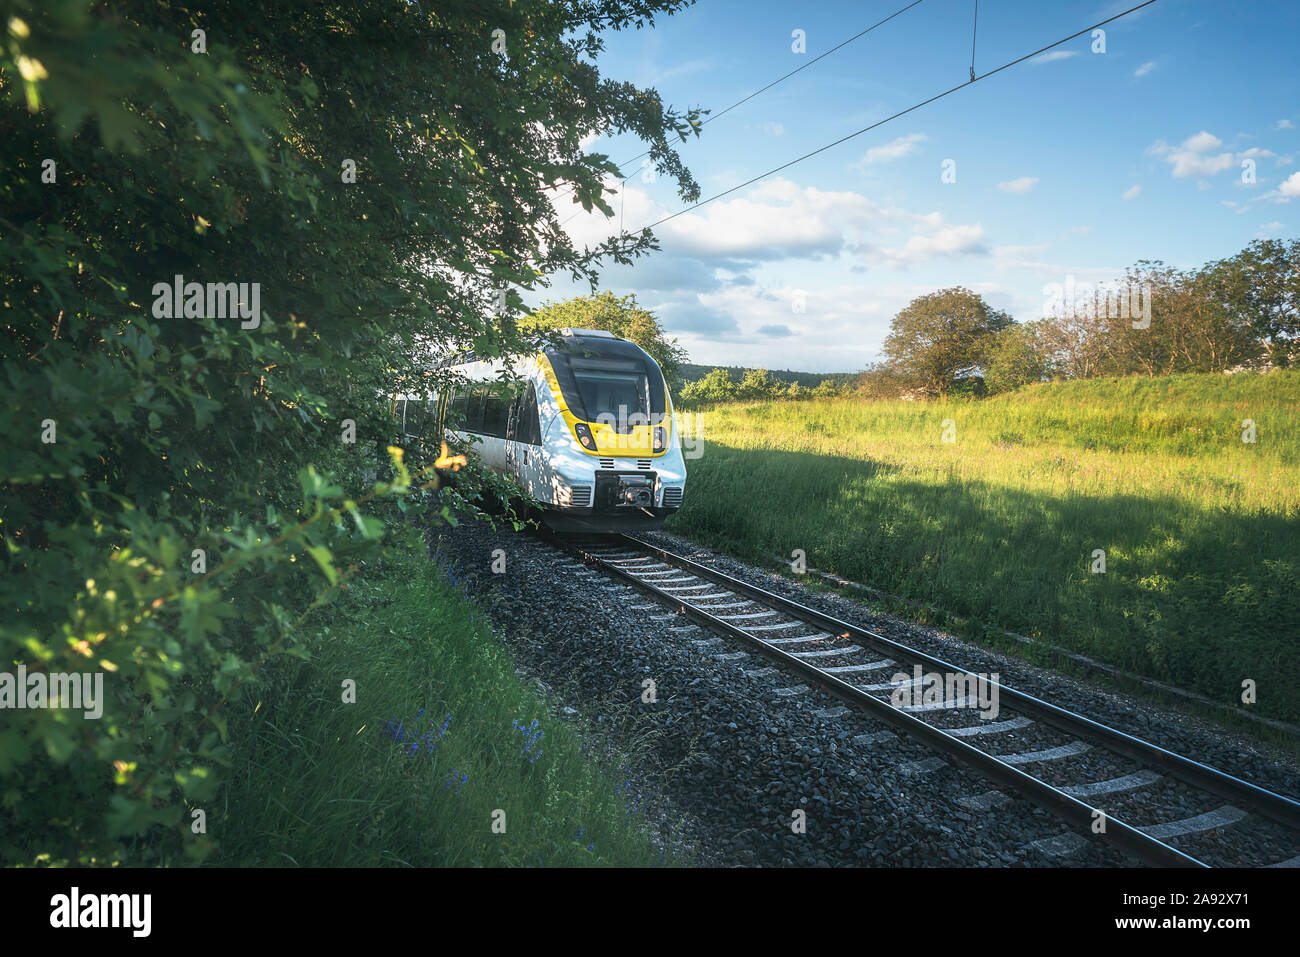 High-speed german train traveling through green nature landscape on sunny day. Train going through countryside scenery near Schwabisch Hall, Germany Stock Photo